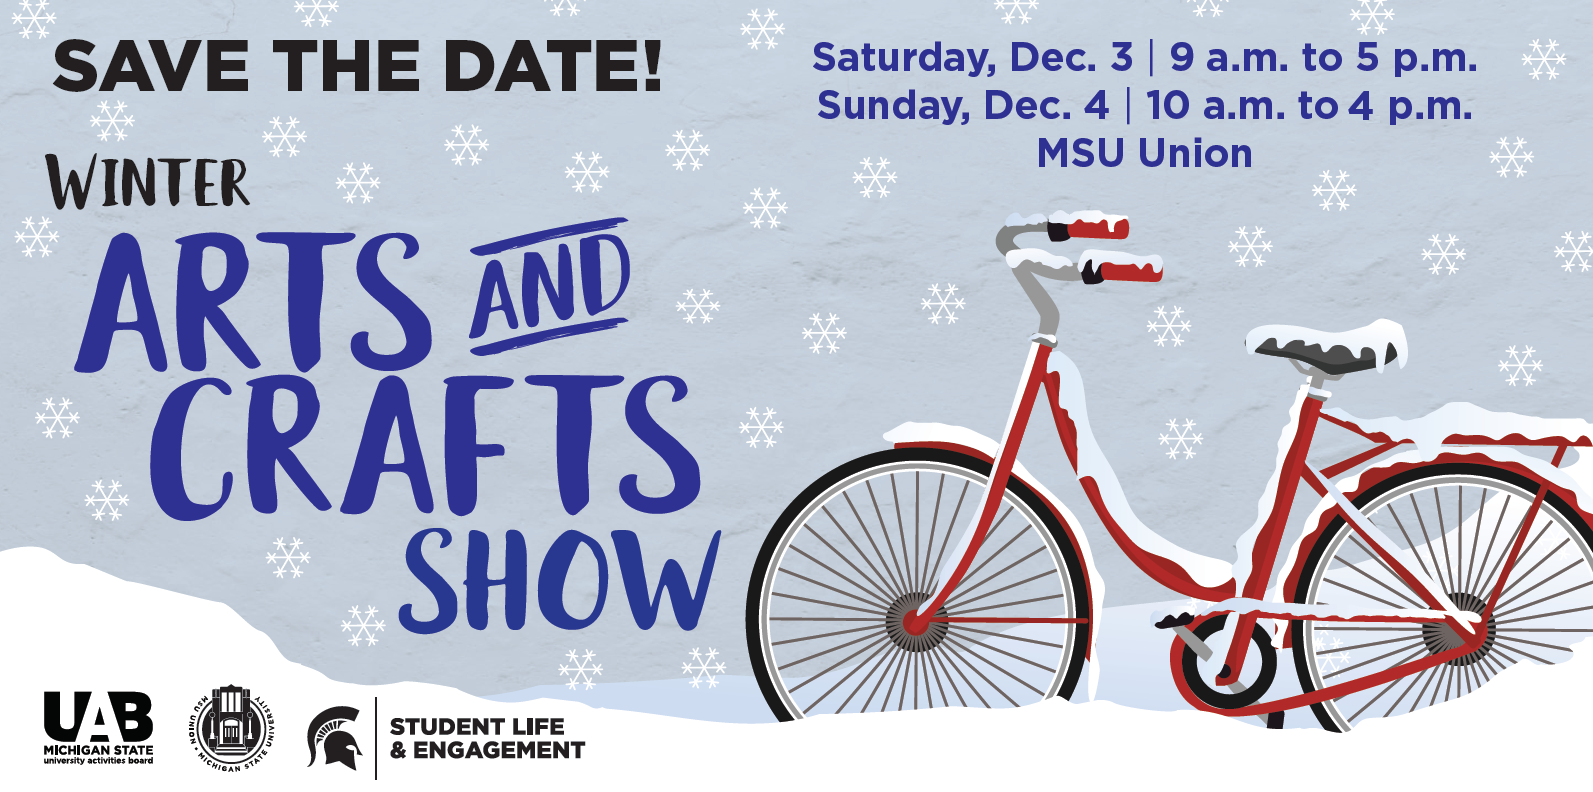 2022 East Lansing Winter Arts and Crafts Show